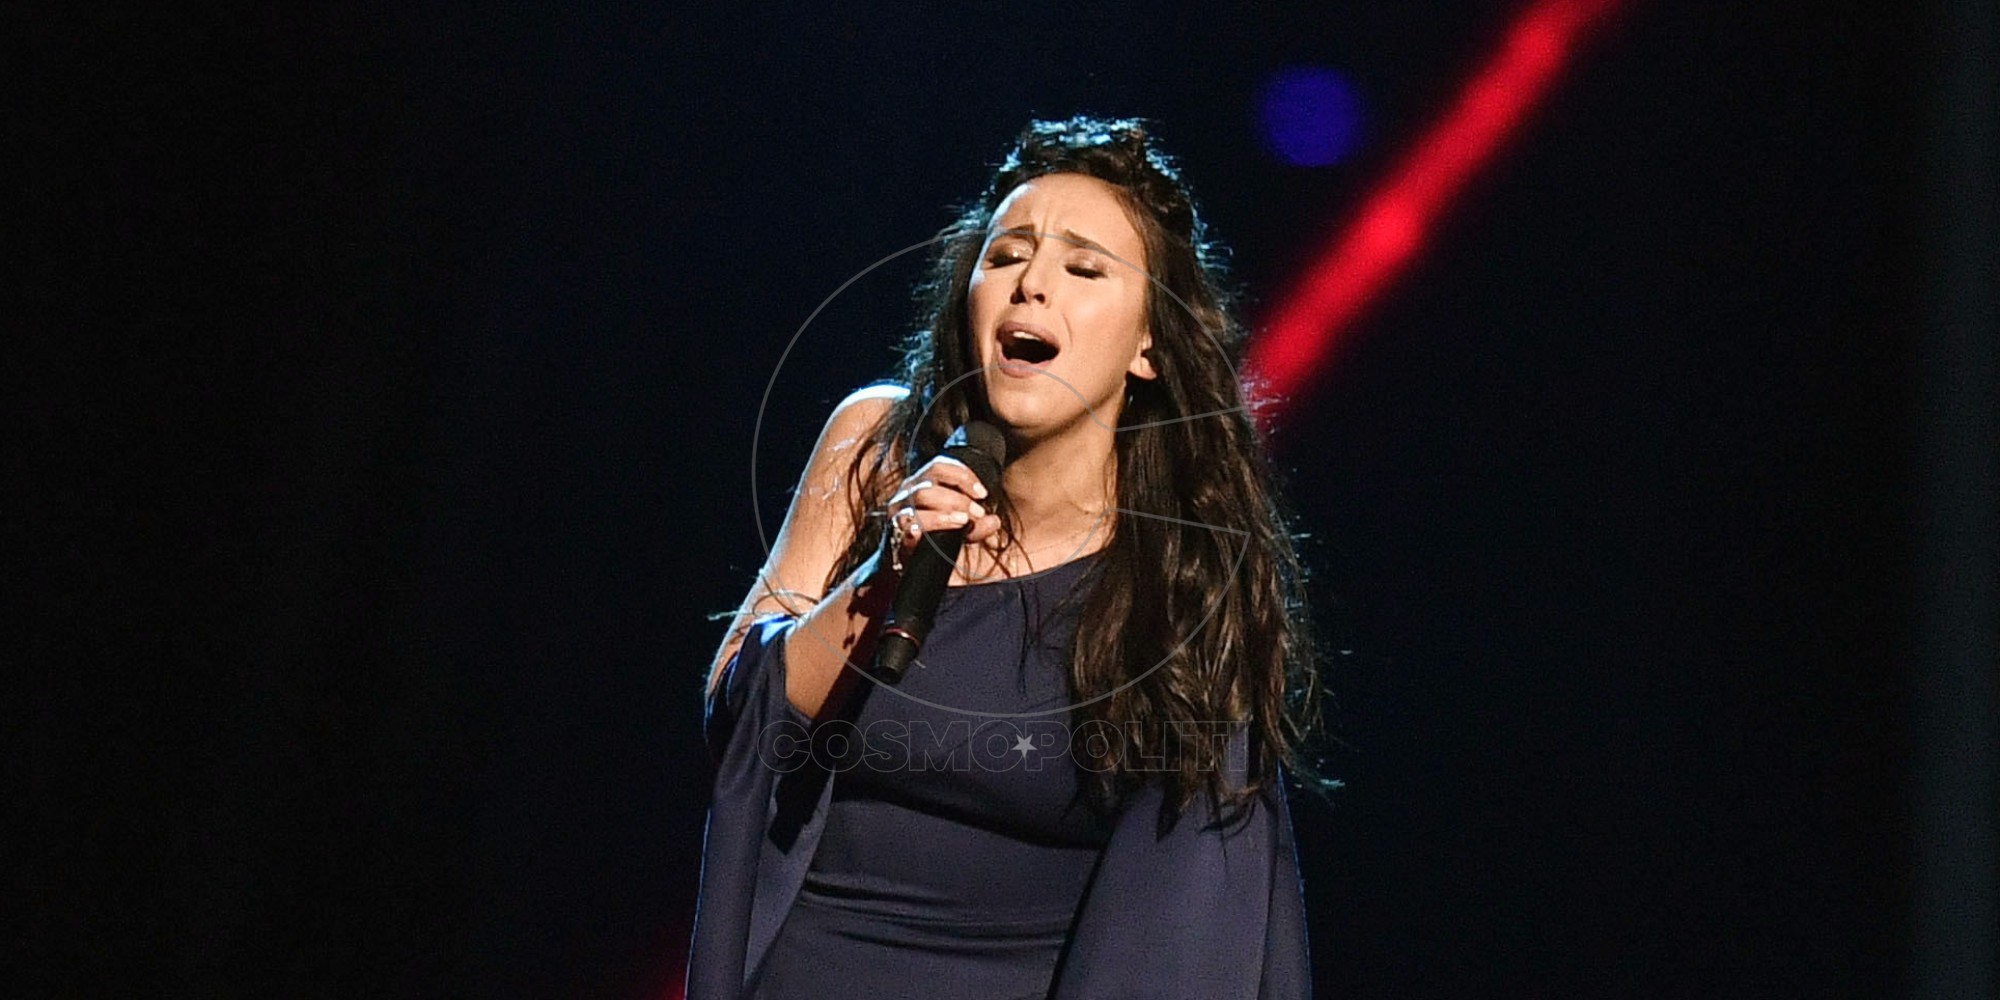 Ukraine's Jamala performs the song '1944' during a dress rehearsal for the second semifinal at the Eurovision Song Contest in Stockholm, Sweden, Wednesday, May 11, 2016. (AP Photo/Martin Meissner)